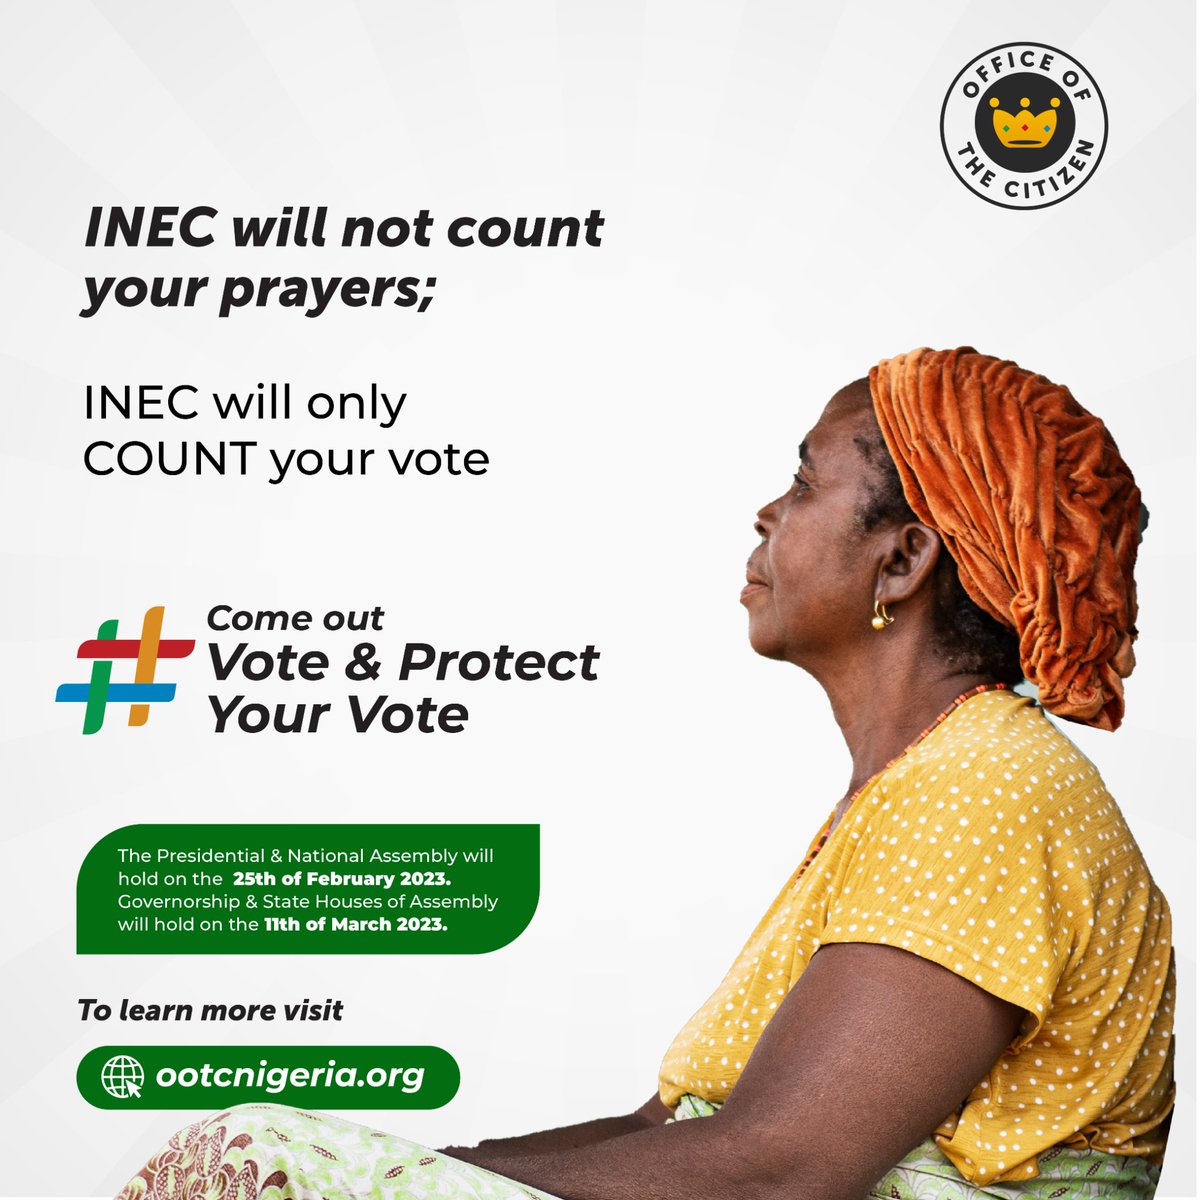 It's 9 days to Nigeria's #2023Elections. INEC will only count your vote, not your prayers. There's a place for prayers, and there's a place for action. It is time to take action. Come out, vote and protect your vote.